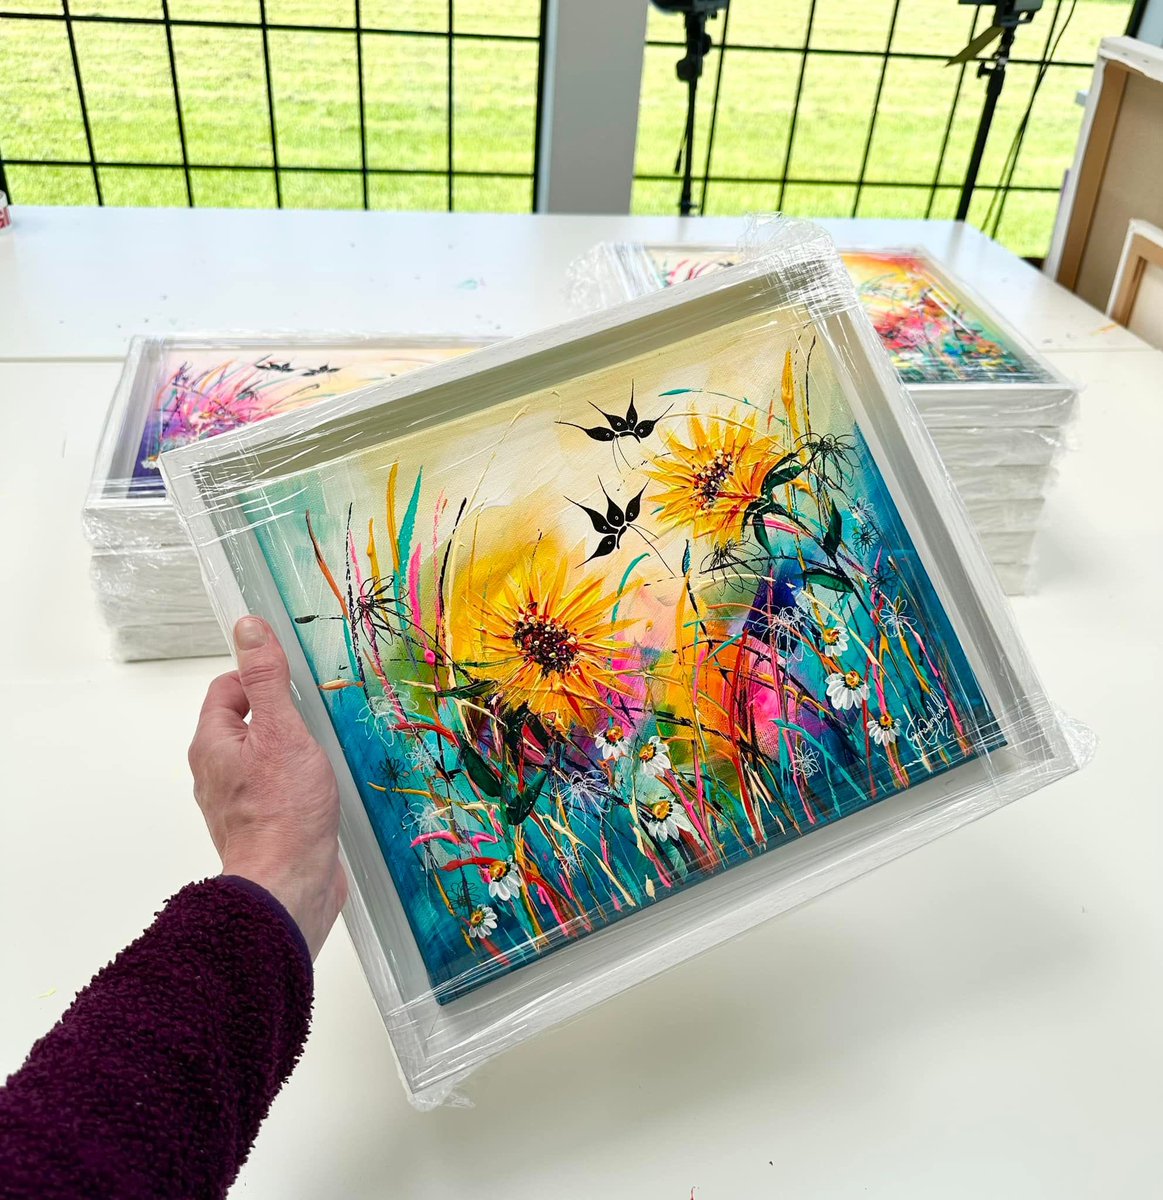 Butterfly collection launched today to my website, all new original paintings floated & framed #artcollector #irishart #contemporaryart 

emmacampbellart.com/collections/or…